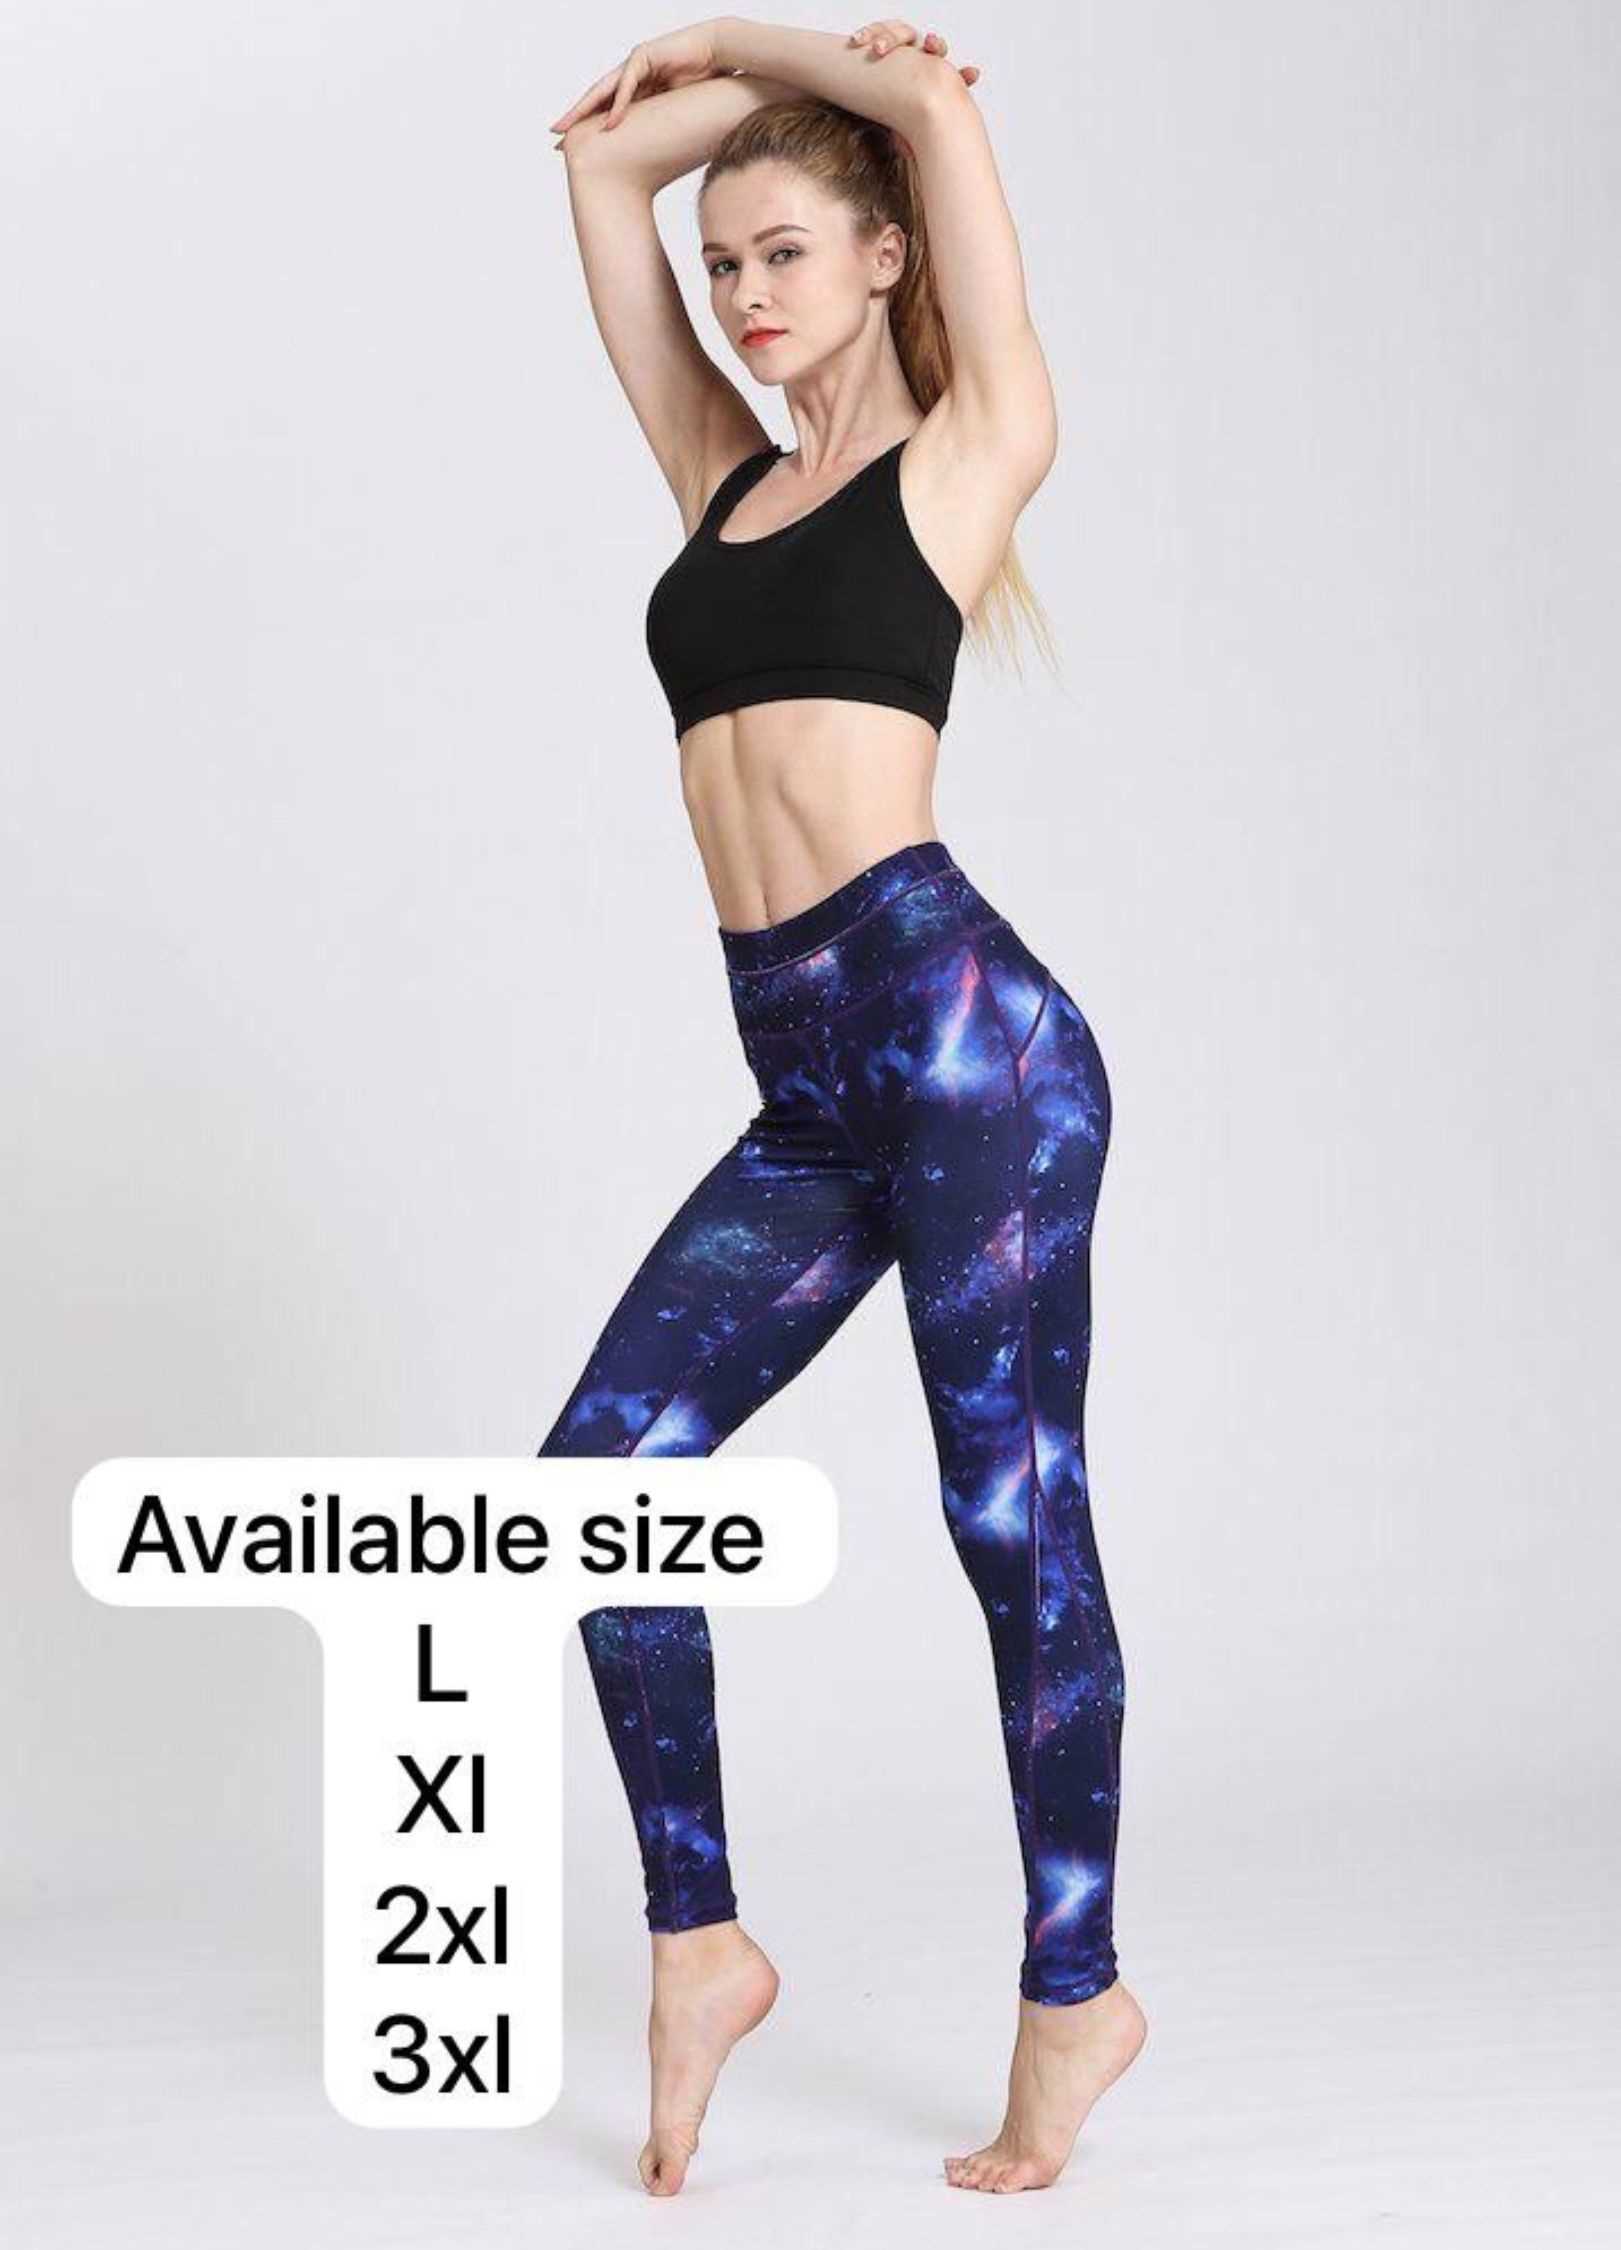 LYCRA Womens Seamless Yoga Best Yoga Leggings VGTN Contour, Ideal For  Jogging, Hiking, Fitness, Gym And Sports Wholesale Tights Style 221121 From  Dou01, $23.14 | DHgate.Com